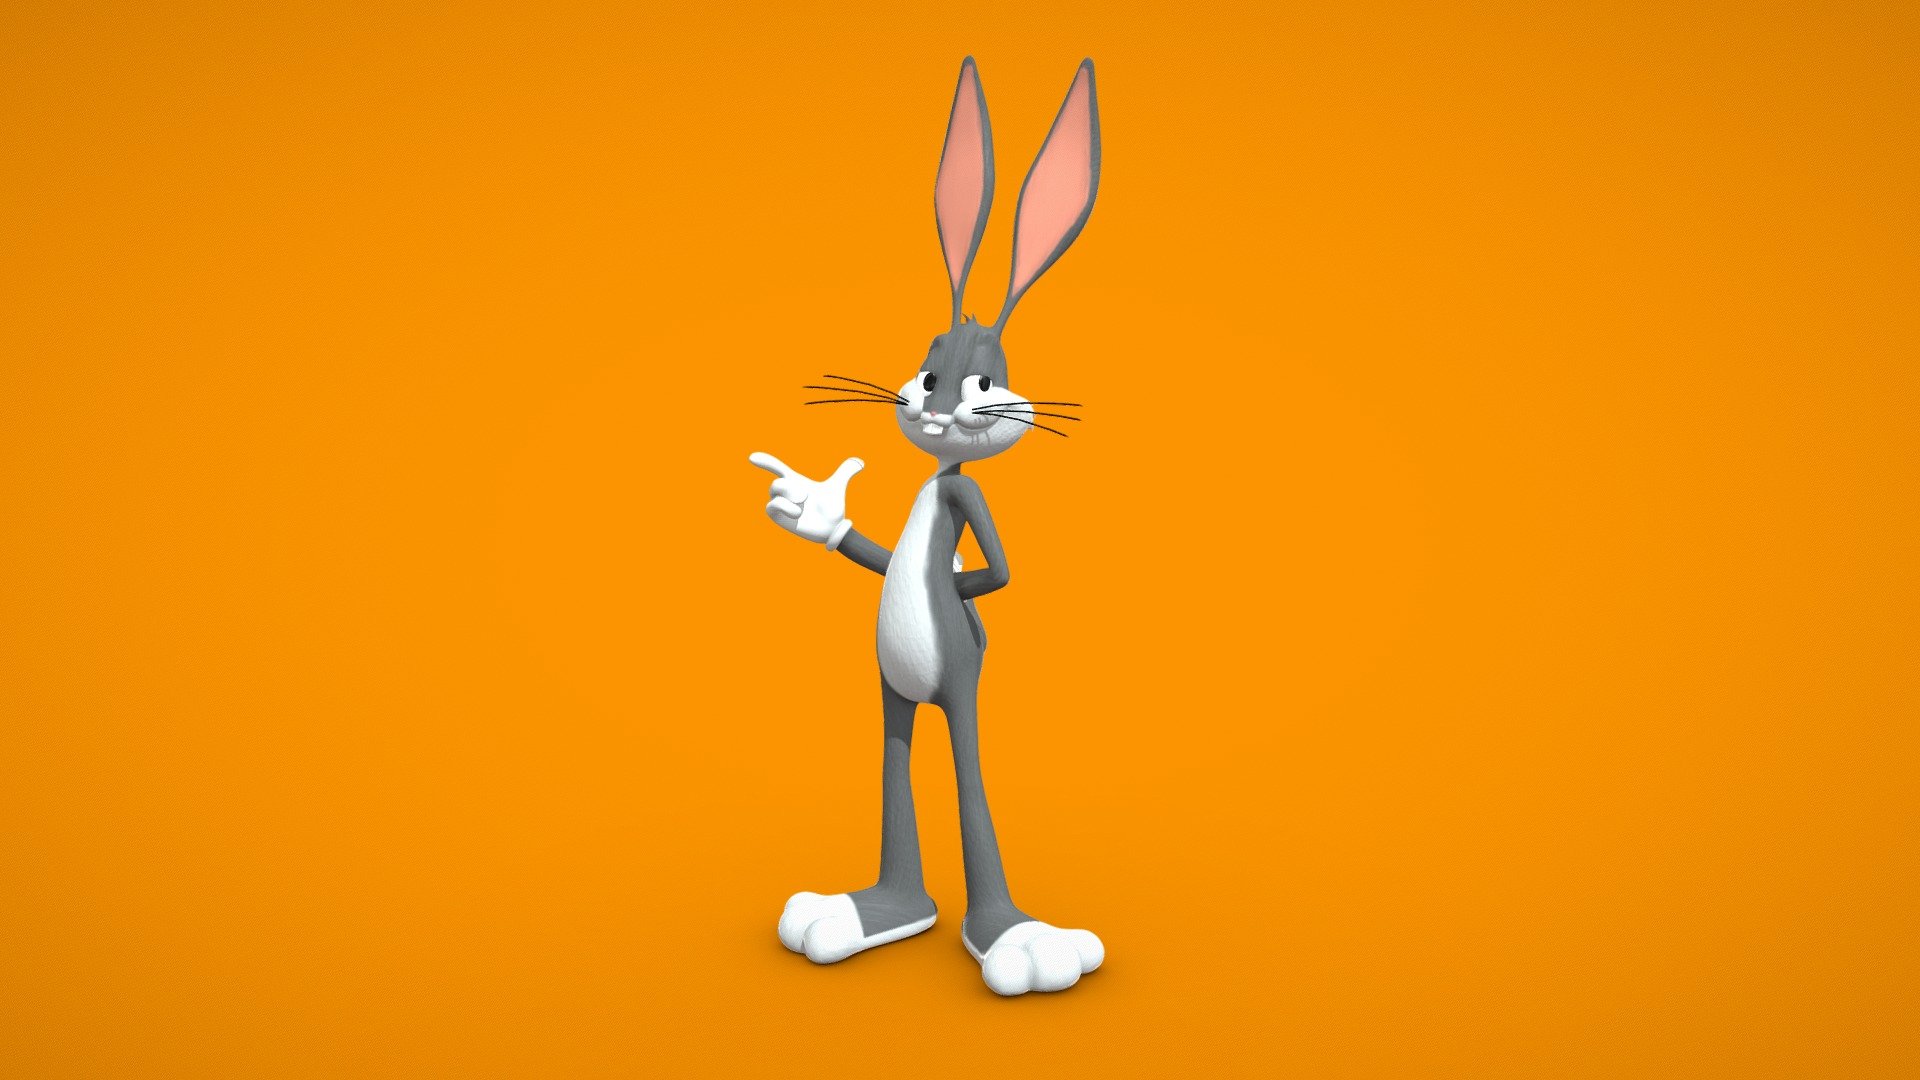 Bugs Bunny sculpture done in Blender. All the modeling was done in live on my Twitch channel. Any feedback in the comments, is appreciated! - Bugs Bunny - 3D model by serpegatto 3d model